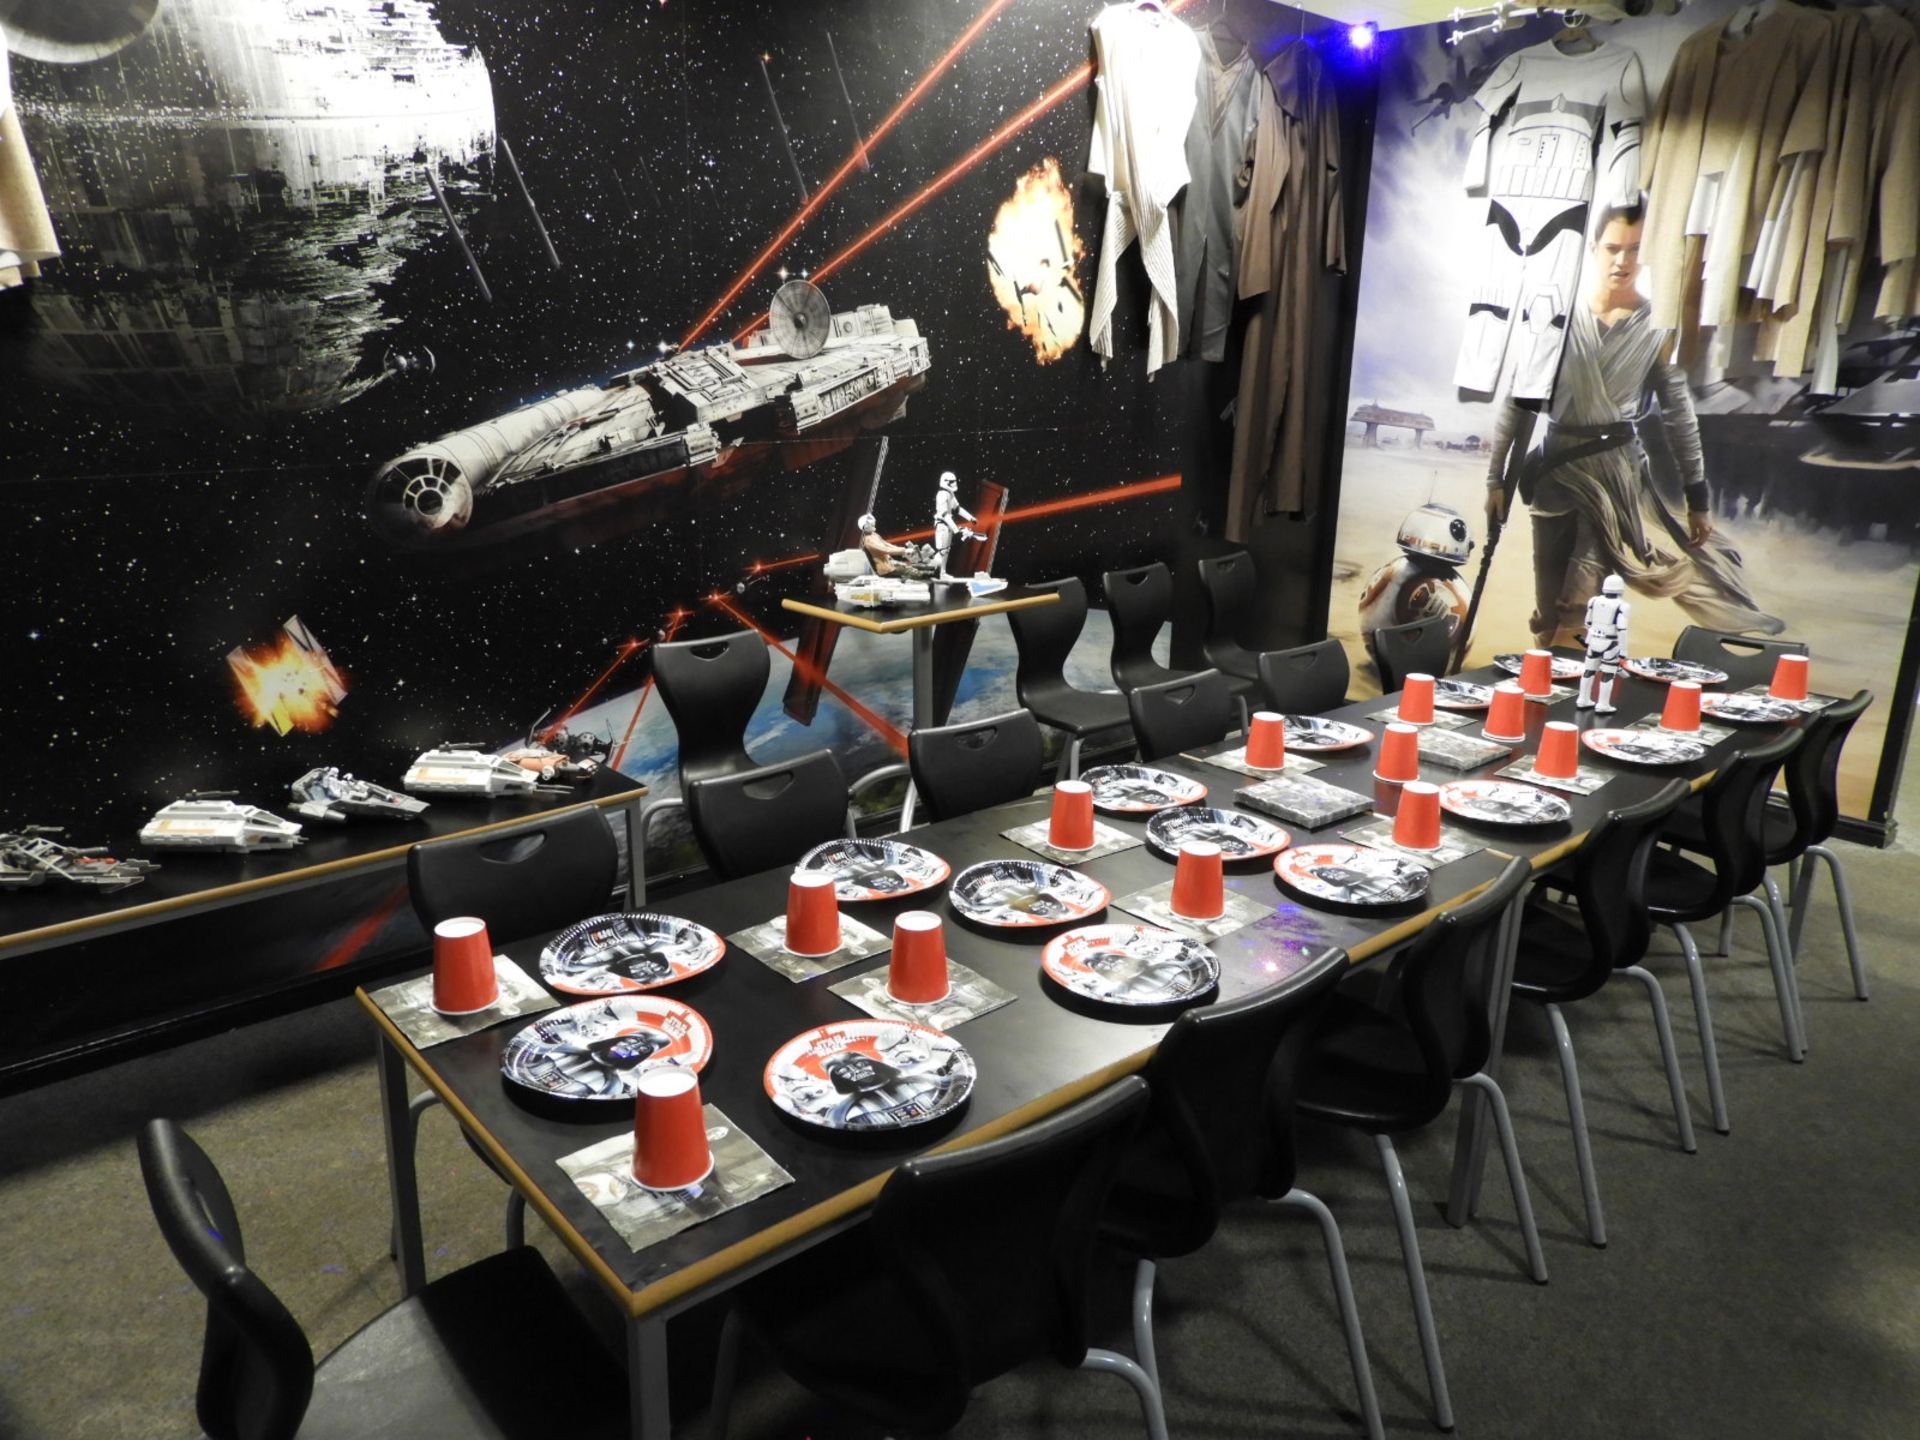 *Contents of Star Wars Themed Party Room which Con - Image 3 of 4